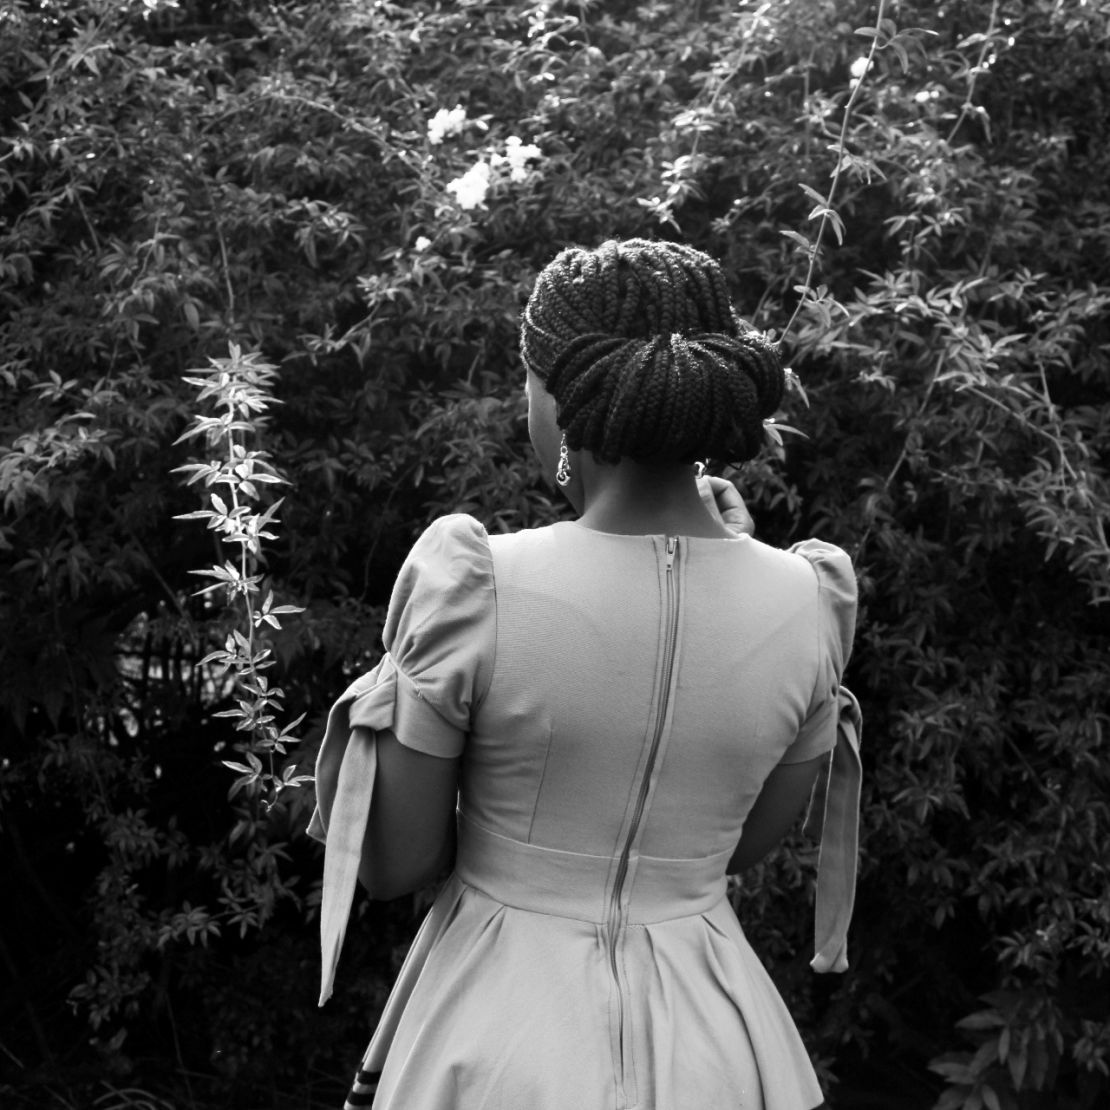 This photo from "Post-Card Africa" shows "a young woman spending time in her garden, connecting to nature," according to Nomonde Kananda, who captured the image in Gauteng, South Africa.